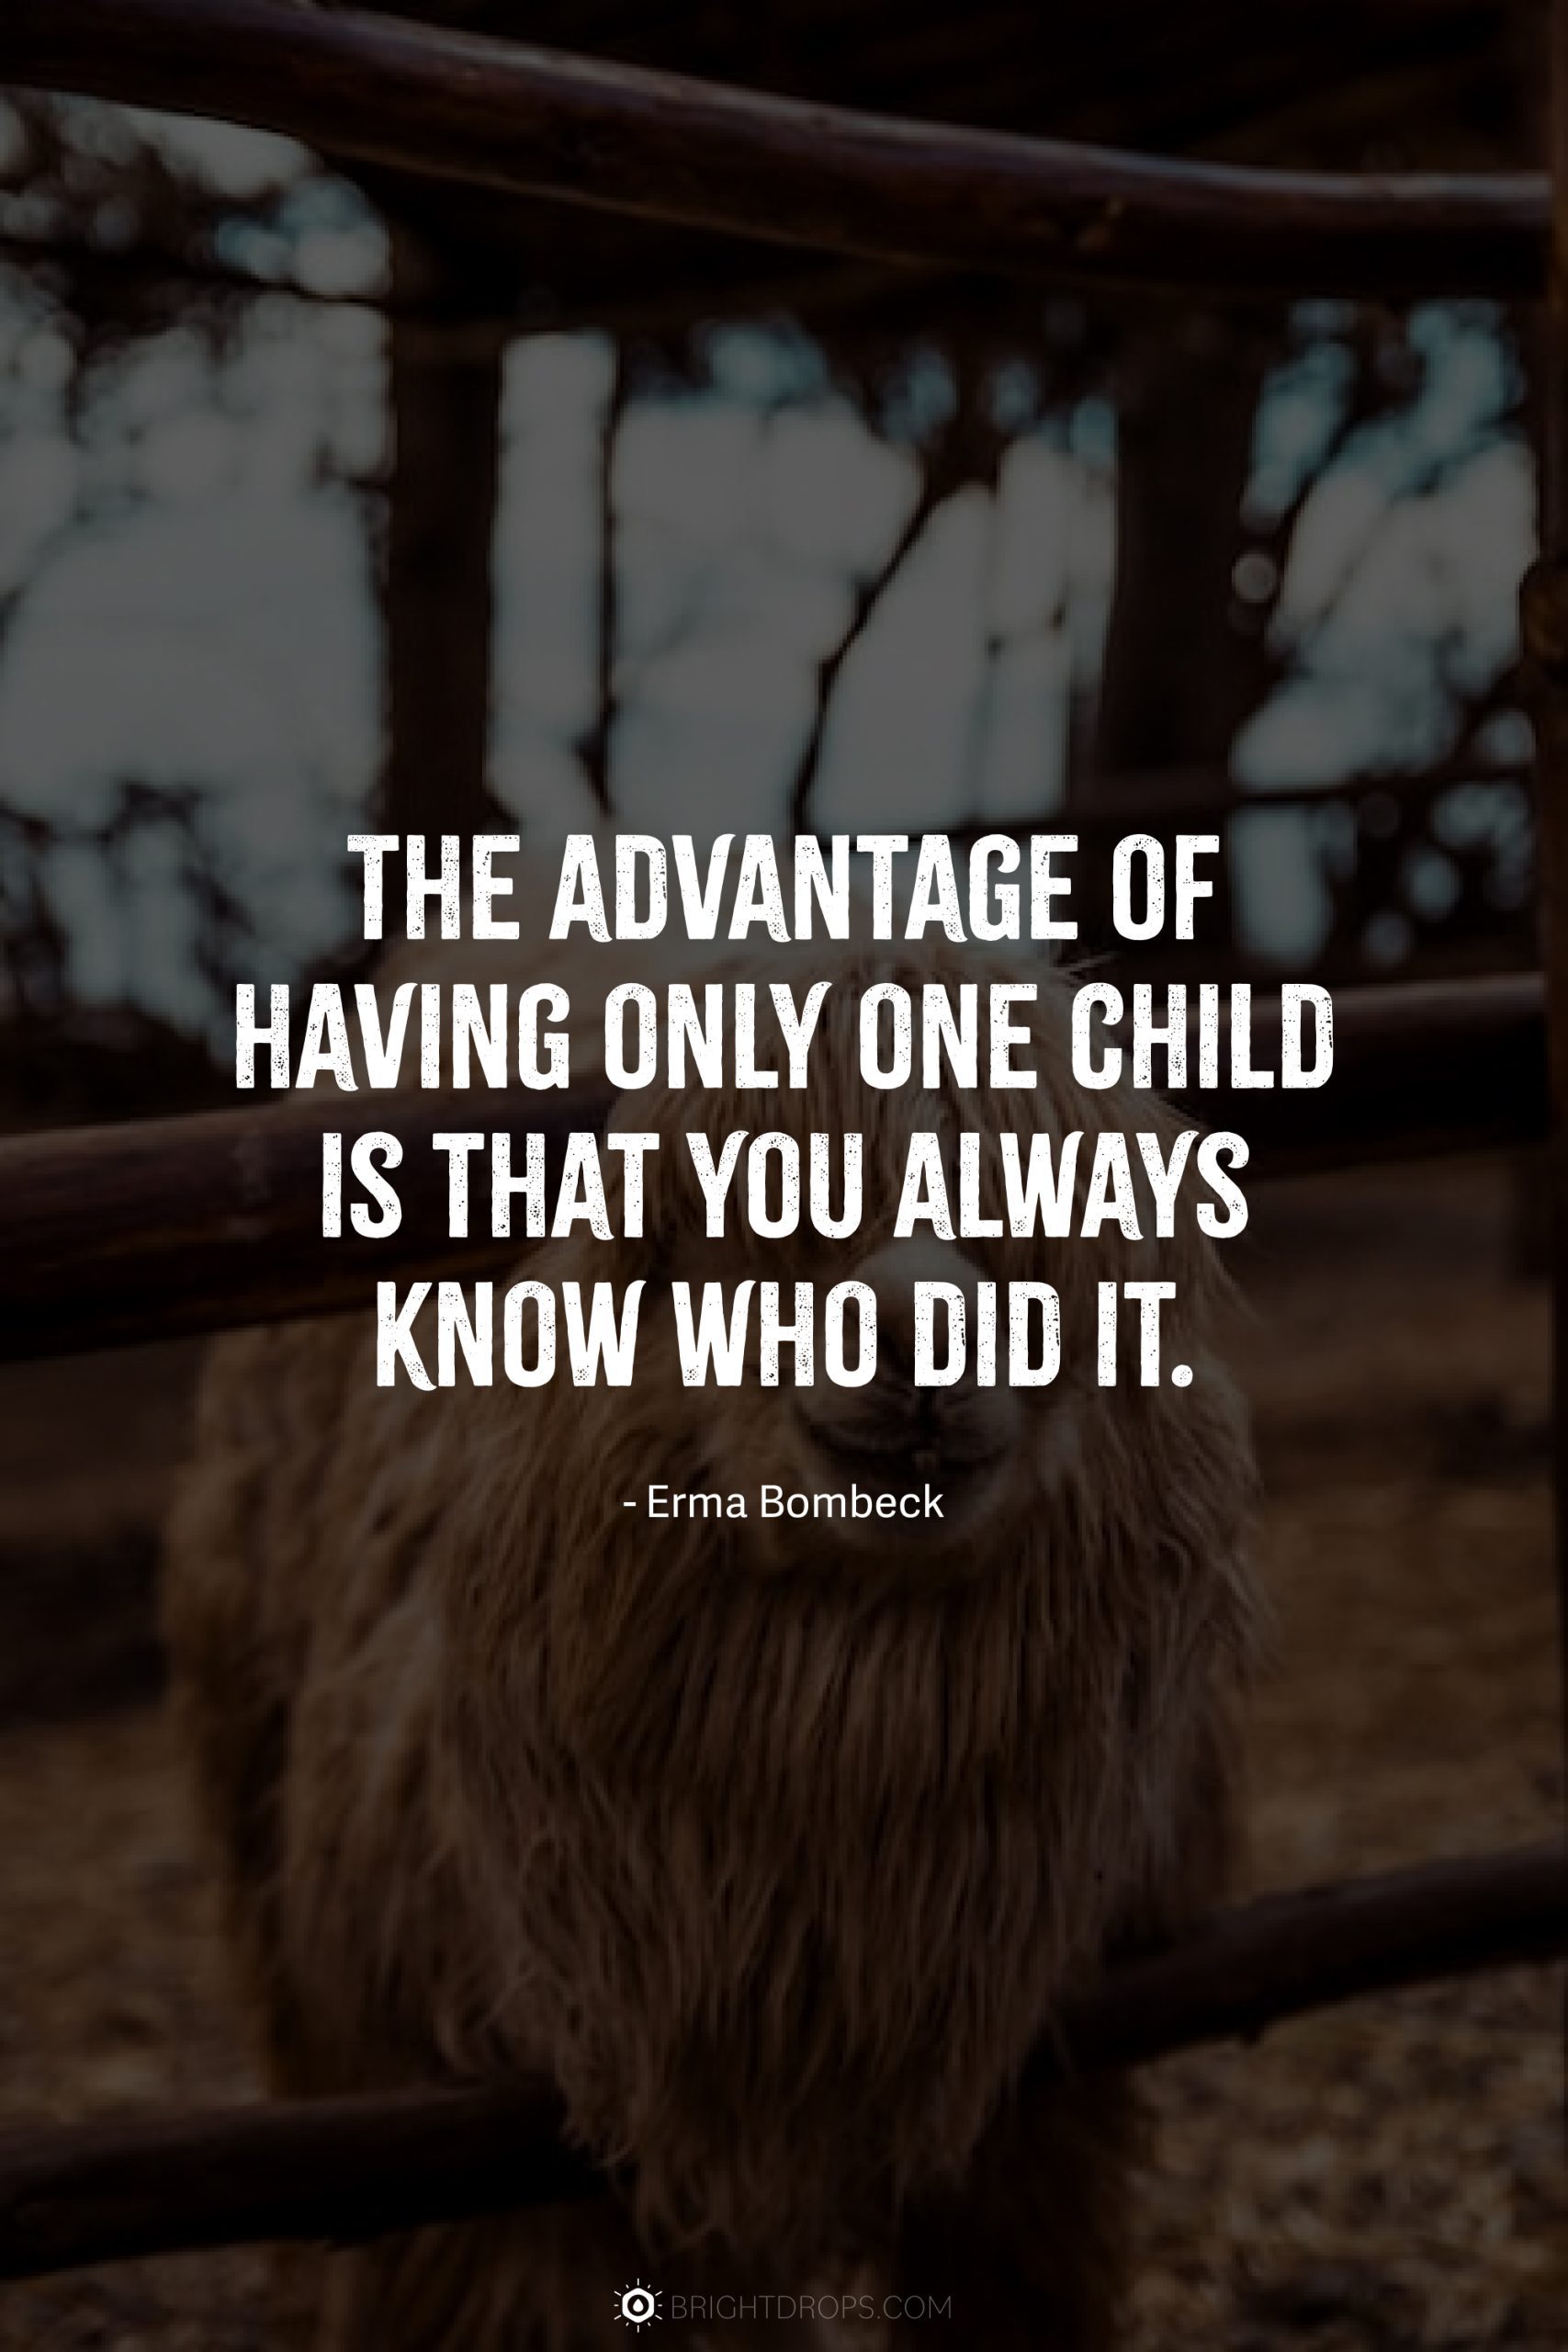 The advantage of having only one child is that you always know who did it.